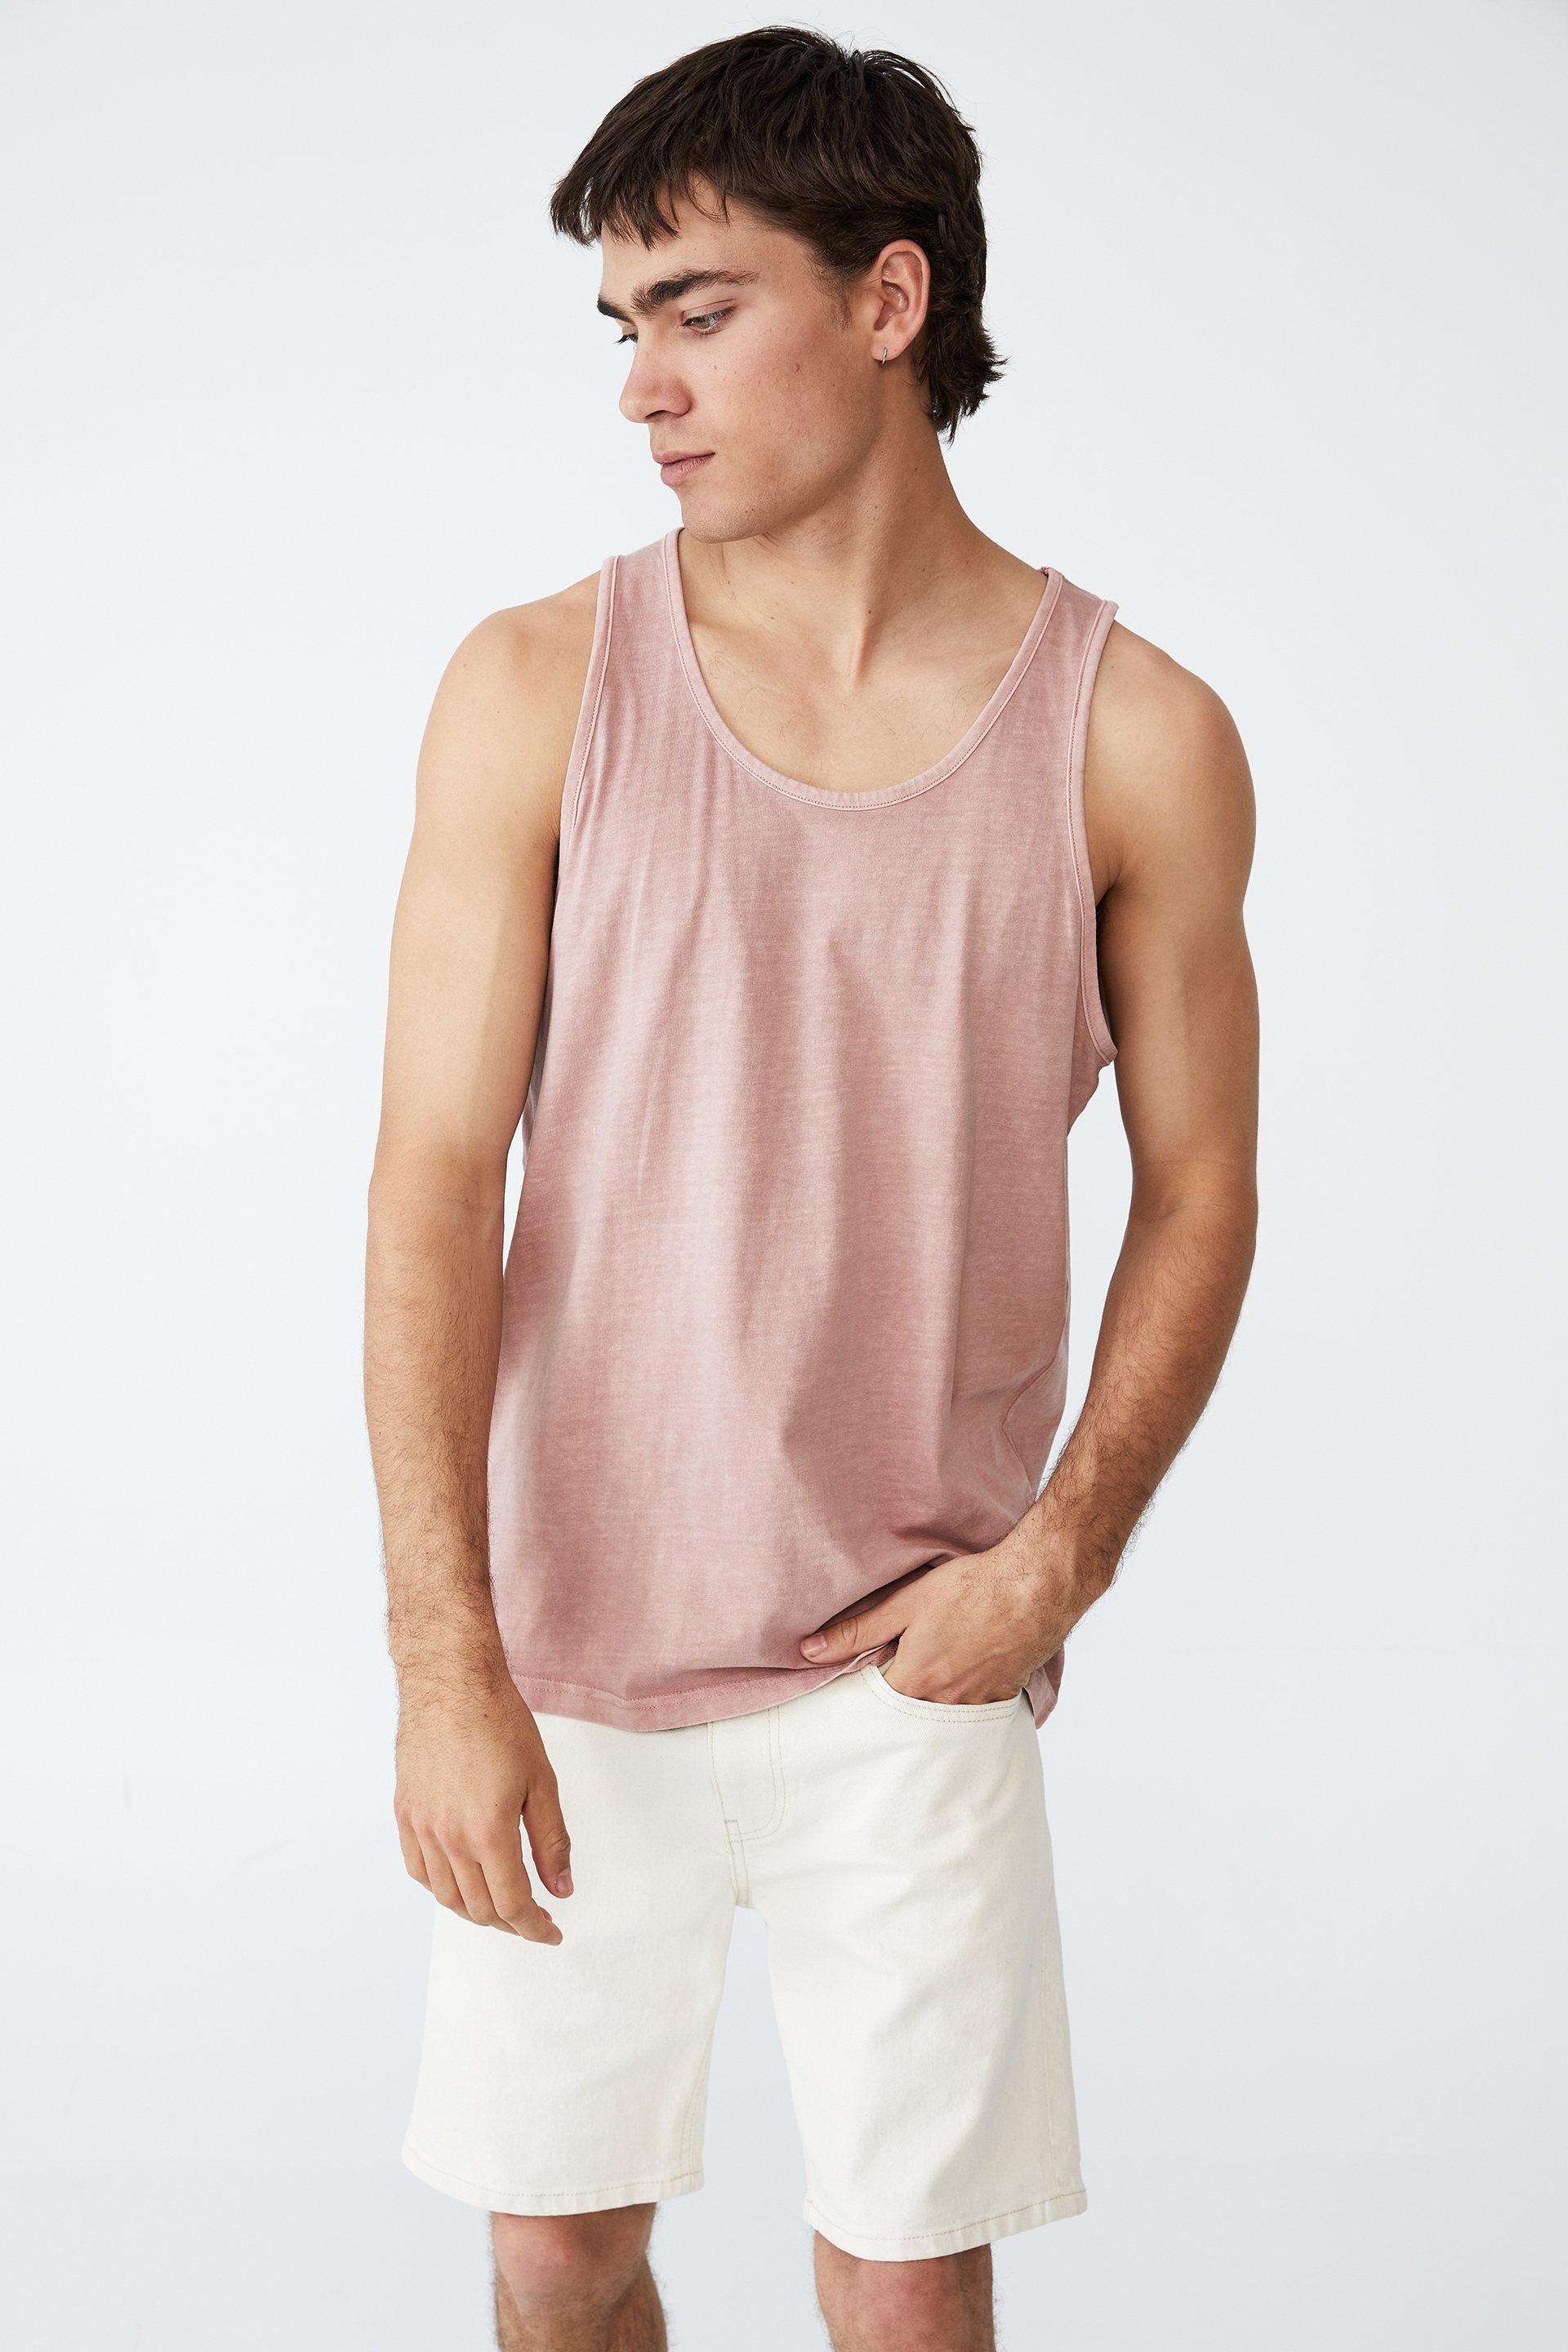 Cotton On Men - Vacation Tank - Plum washed